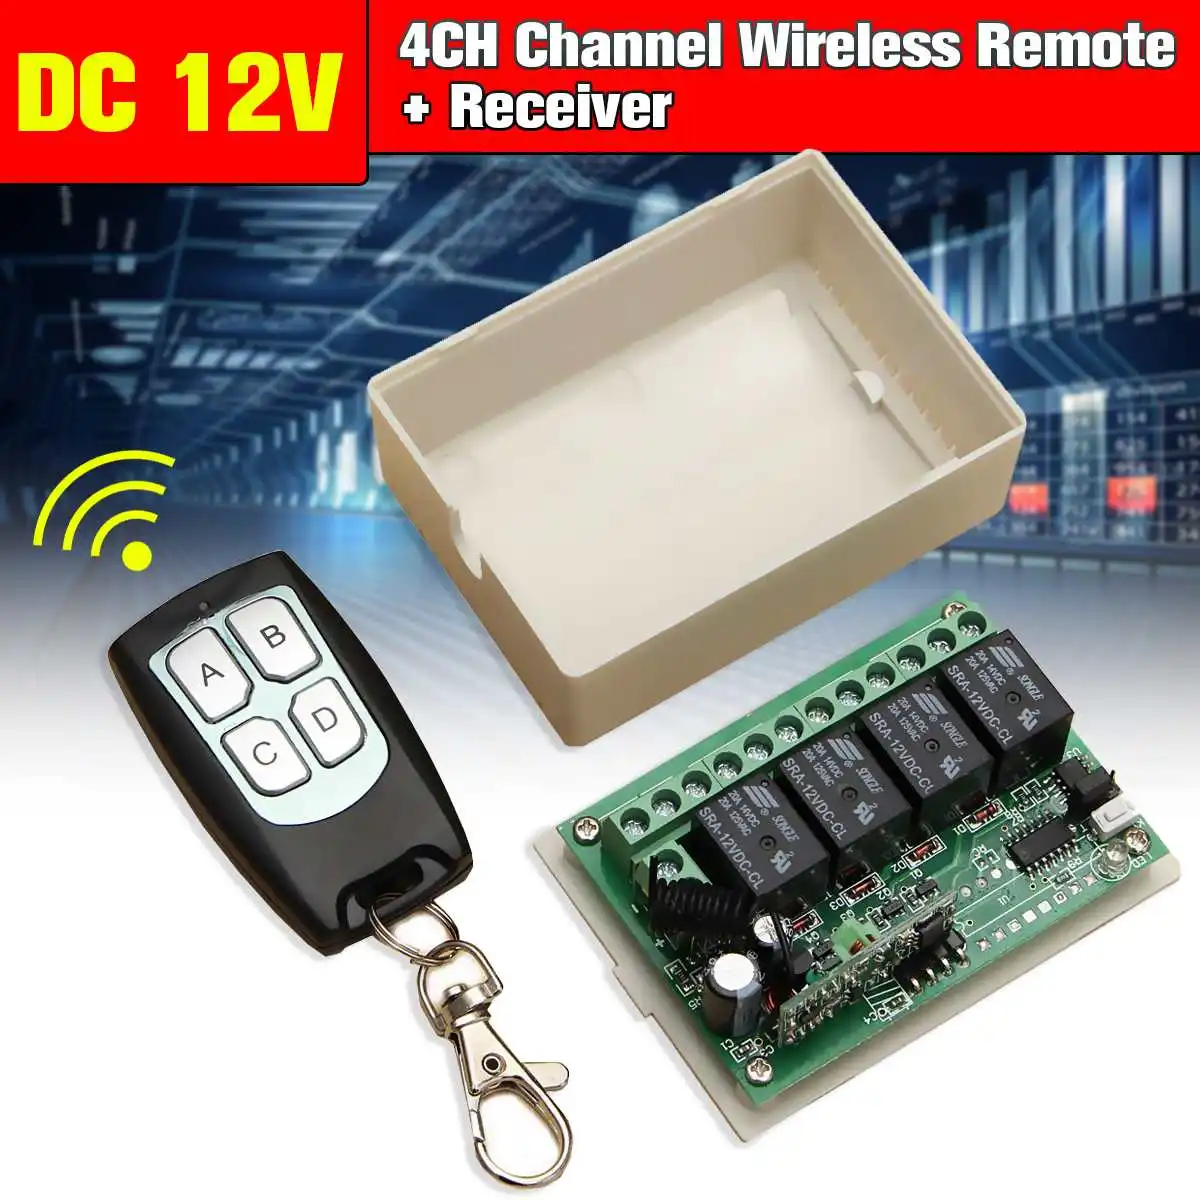 

CLAITE Wireless 433mHz Remote Control Switch Universal DC 12V 4 Channel 4CH Controller 200m Transmitter + Receiver